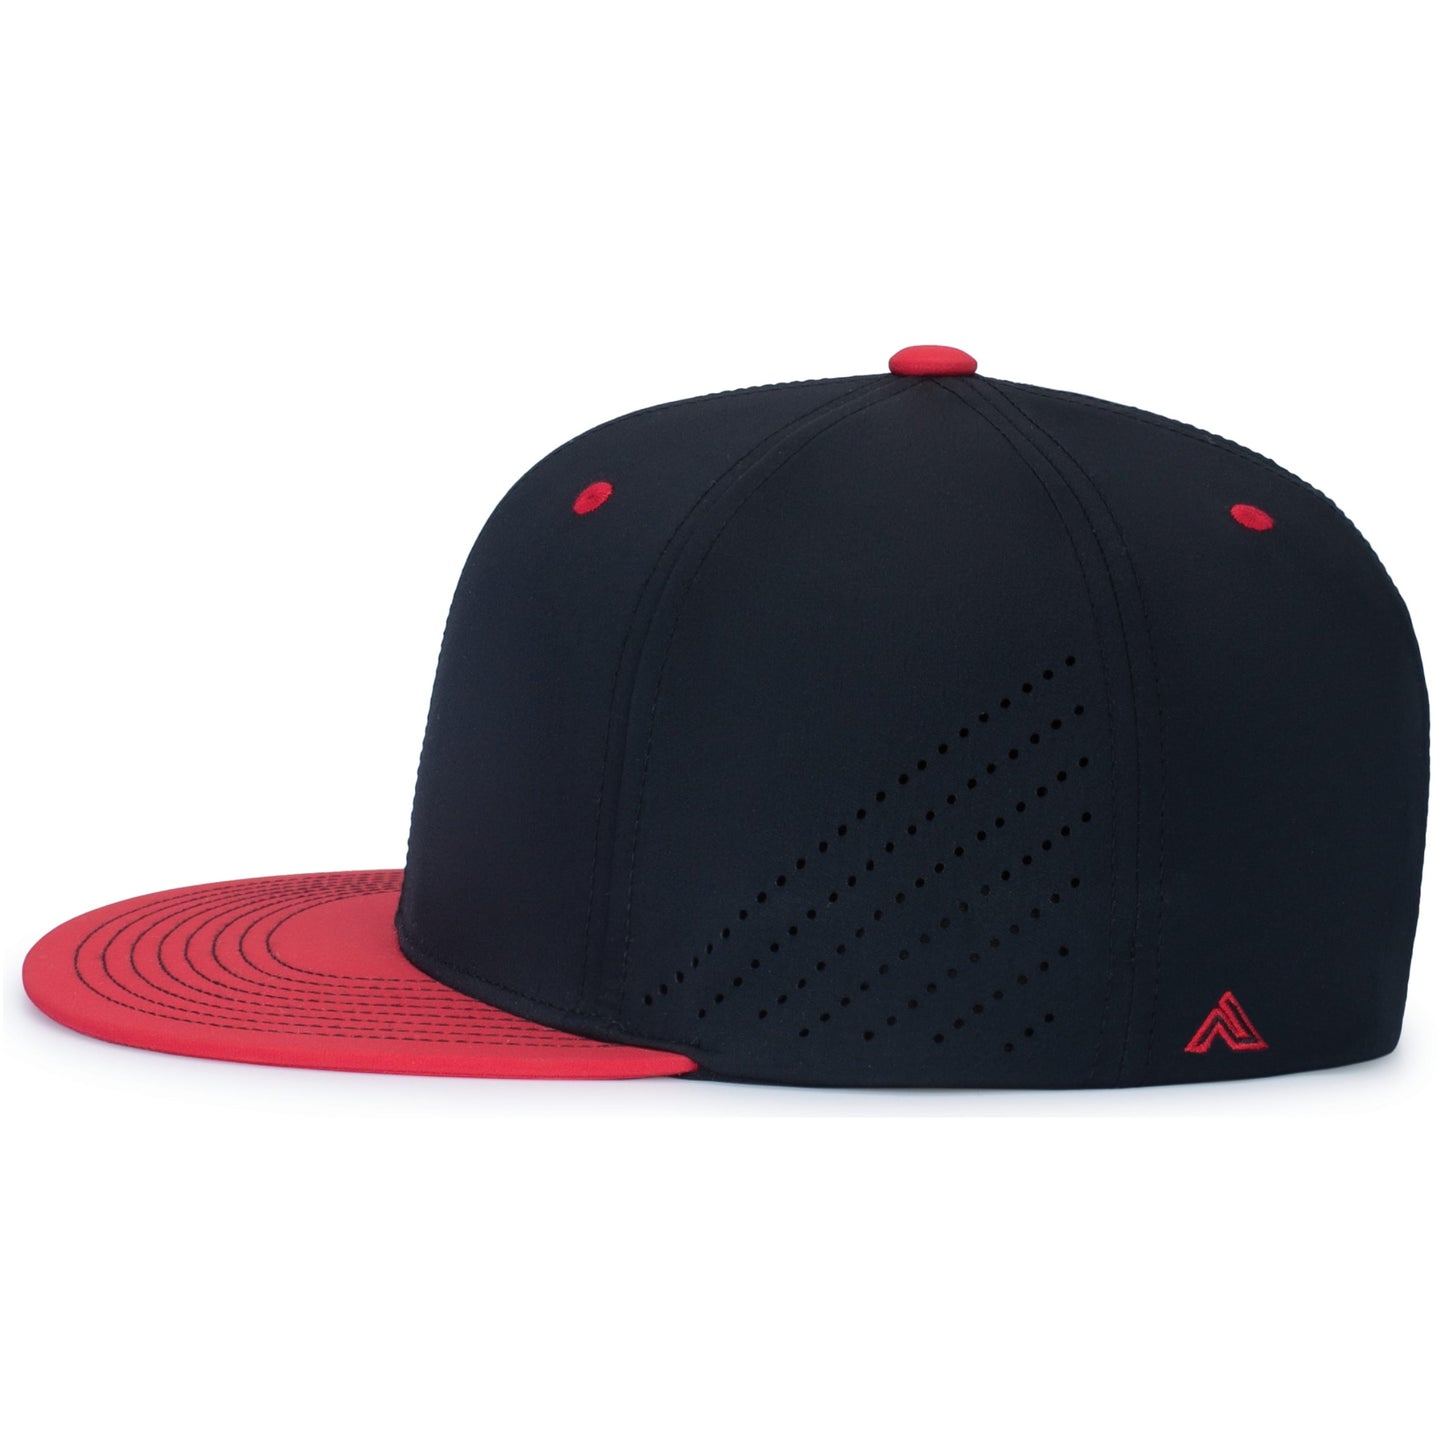 "Blackout" Player Hat - Premium Perforated Fitted Pro Model